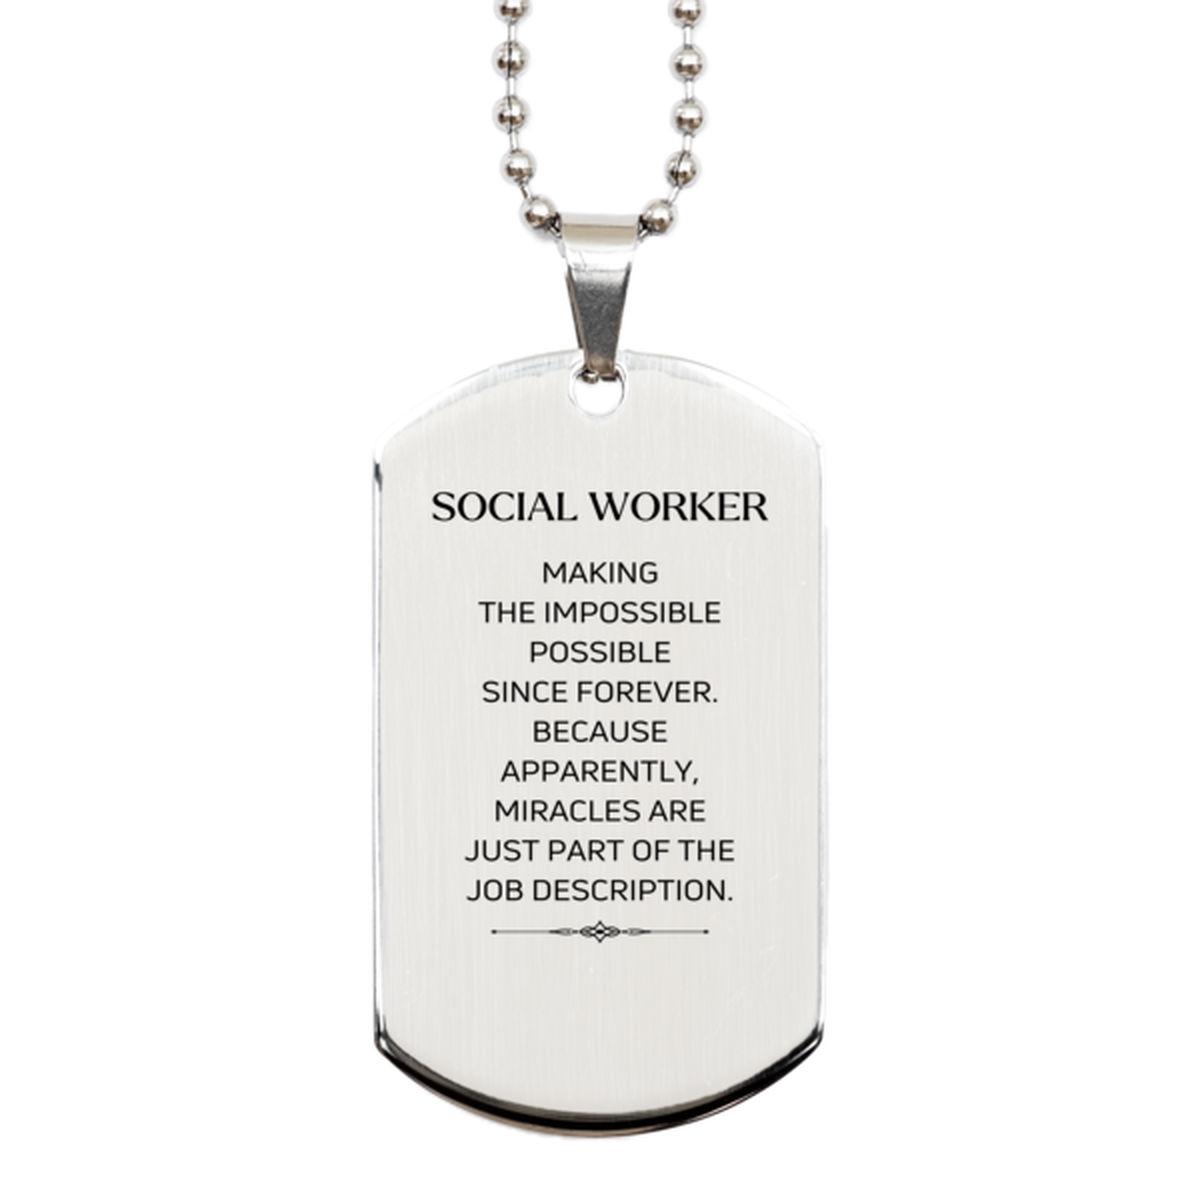 Funny Social Worker Gifts, Miracles are just part of the job description, Inspirational Birthday Silver Dog Tag For Social Worker, Men, Women, Coworkers, Friends, Boss